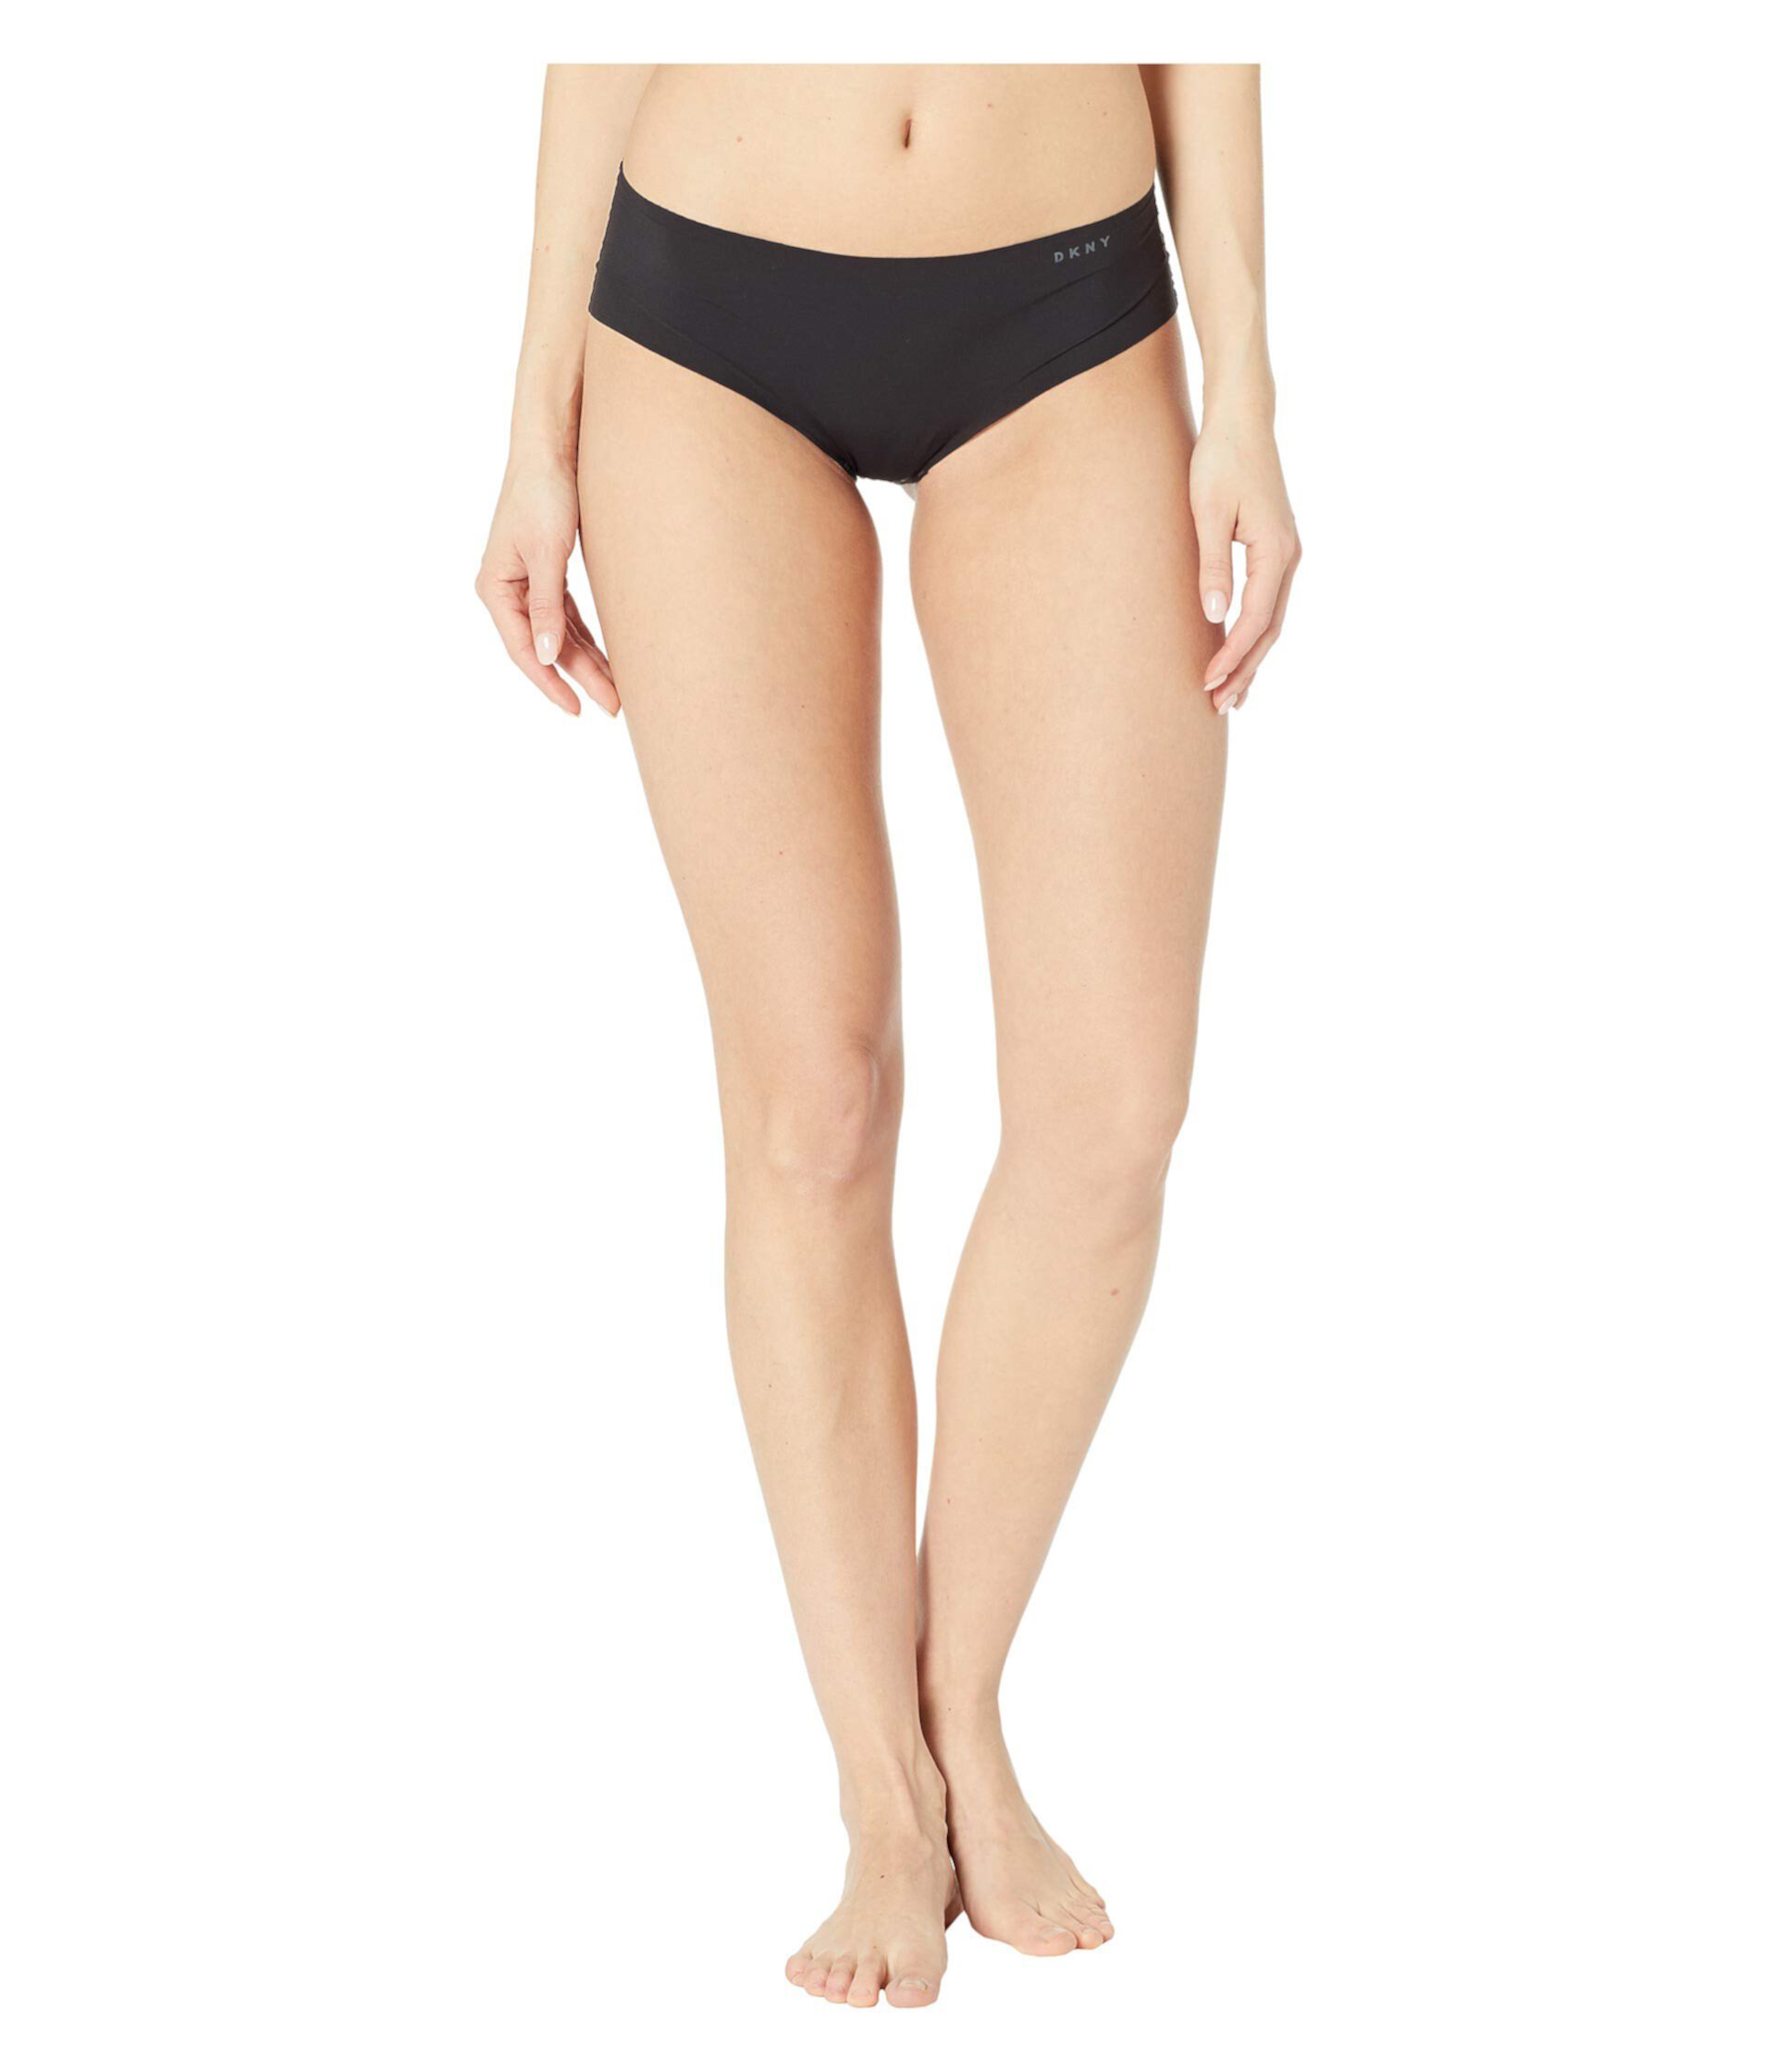 Litewear Cut Anywhere Hipster DKNY Intimates